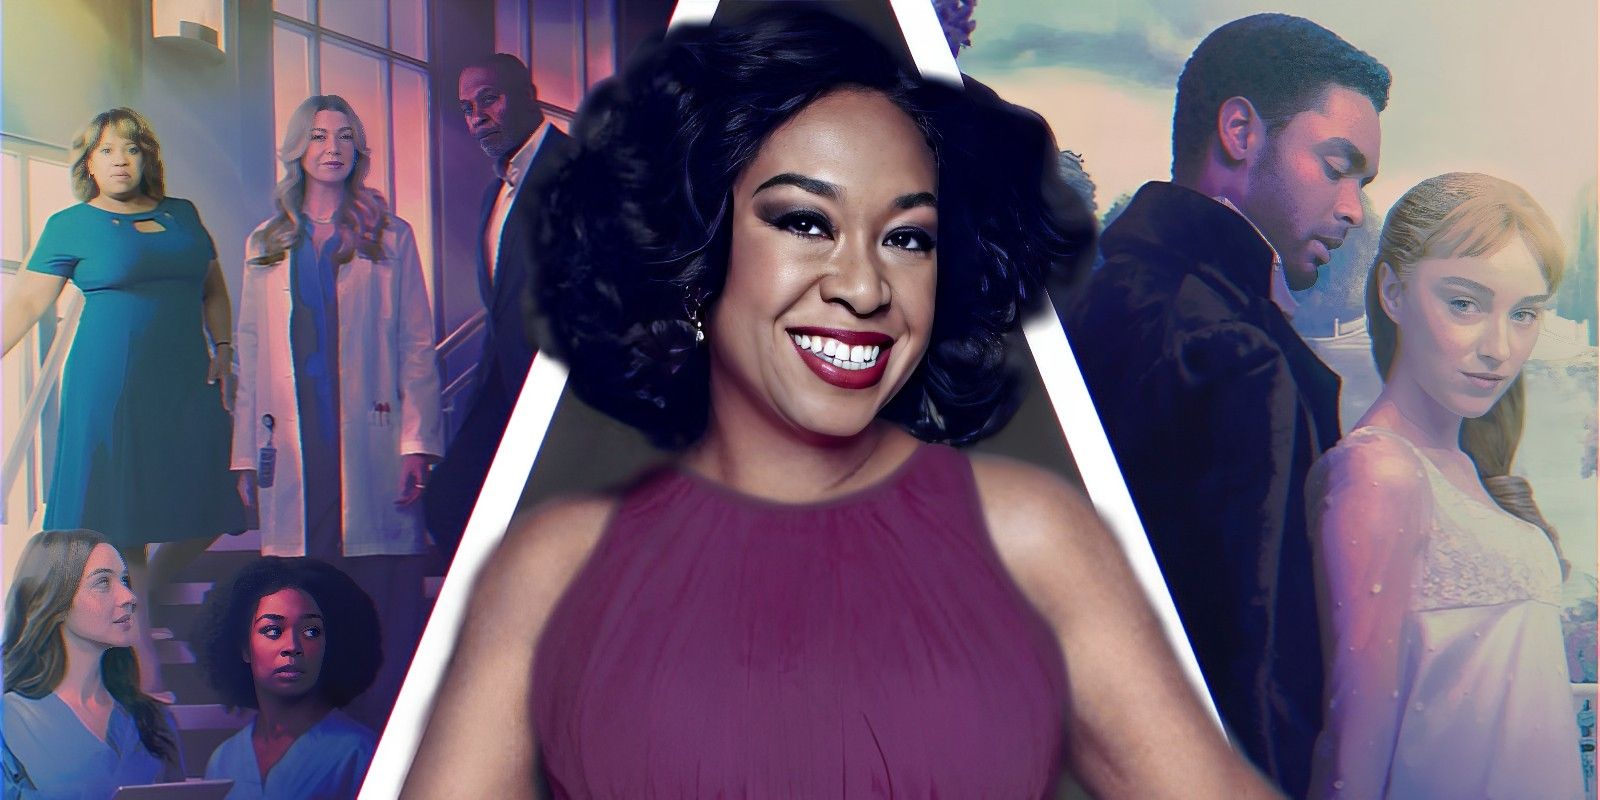 Shonda Rhimes smiling alongside the posters from Bridgerton and Grey’s Anatomy.